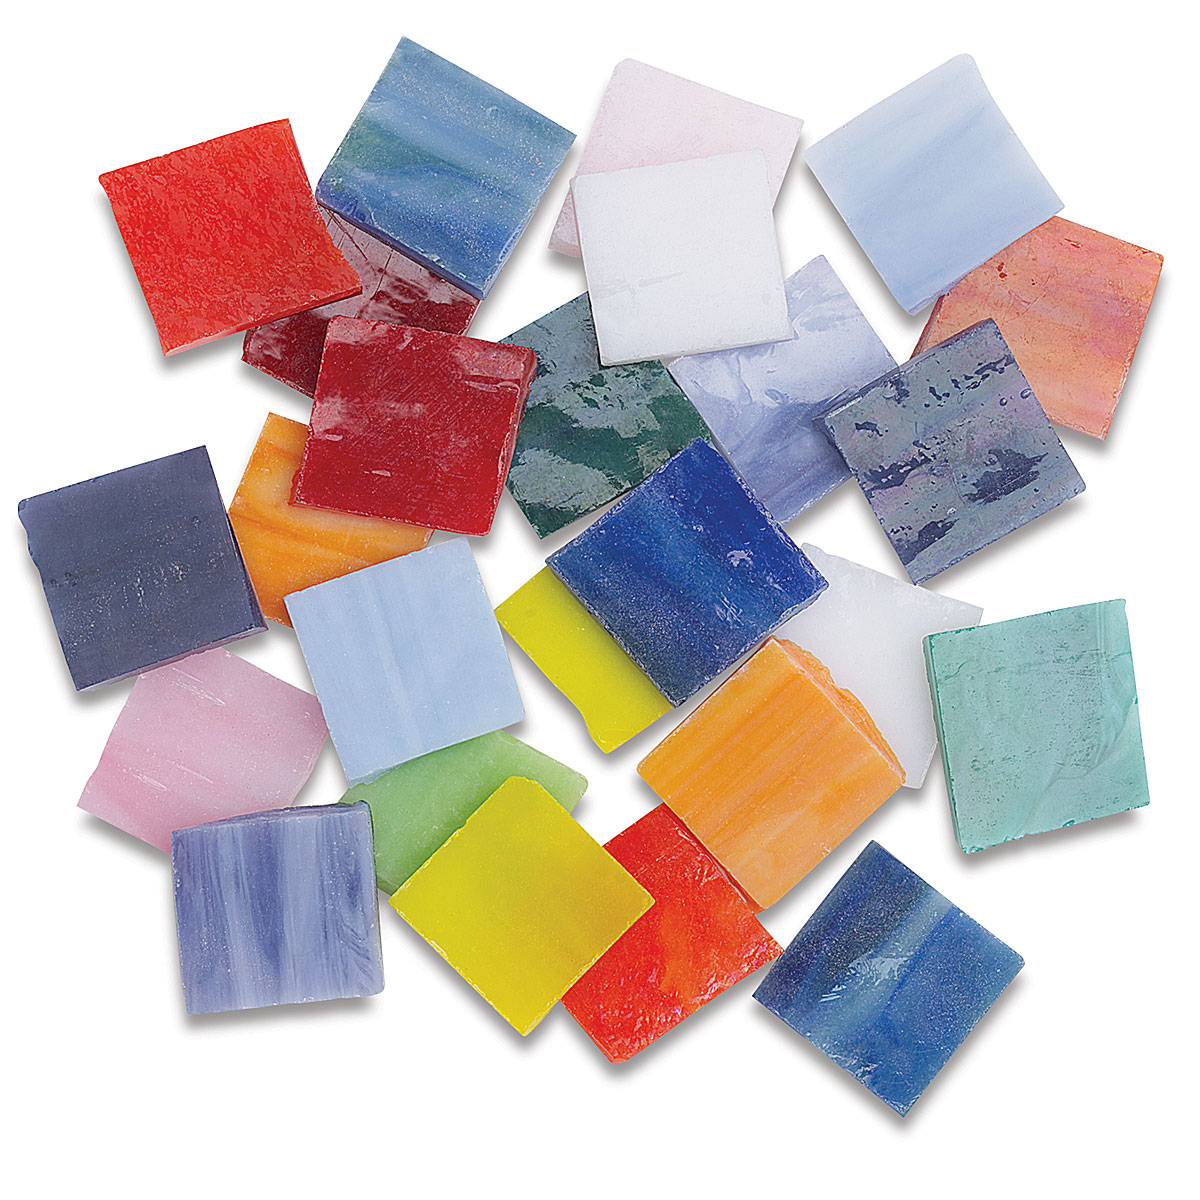 784 Pieces Colorful Ceramic Mosaic Tiles for Crafts, Tiny Square Glazed  Porcelain Pieces Sheets for Mosaics 